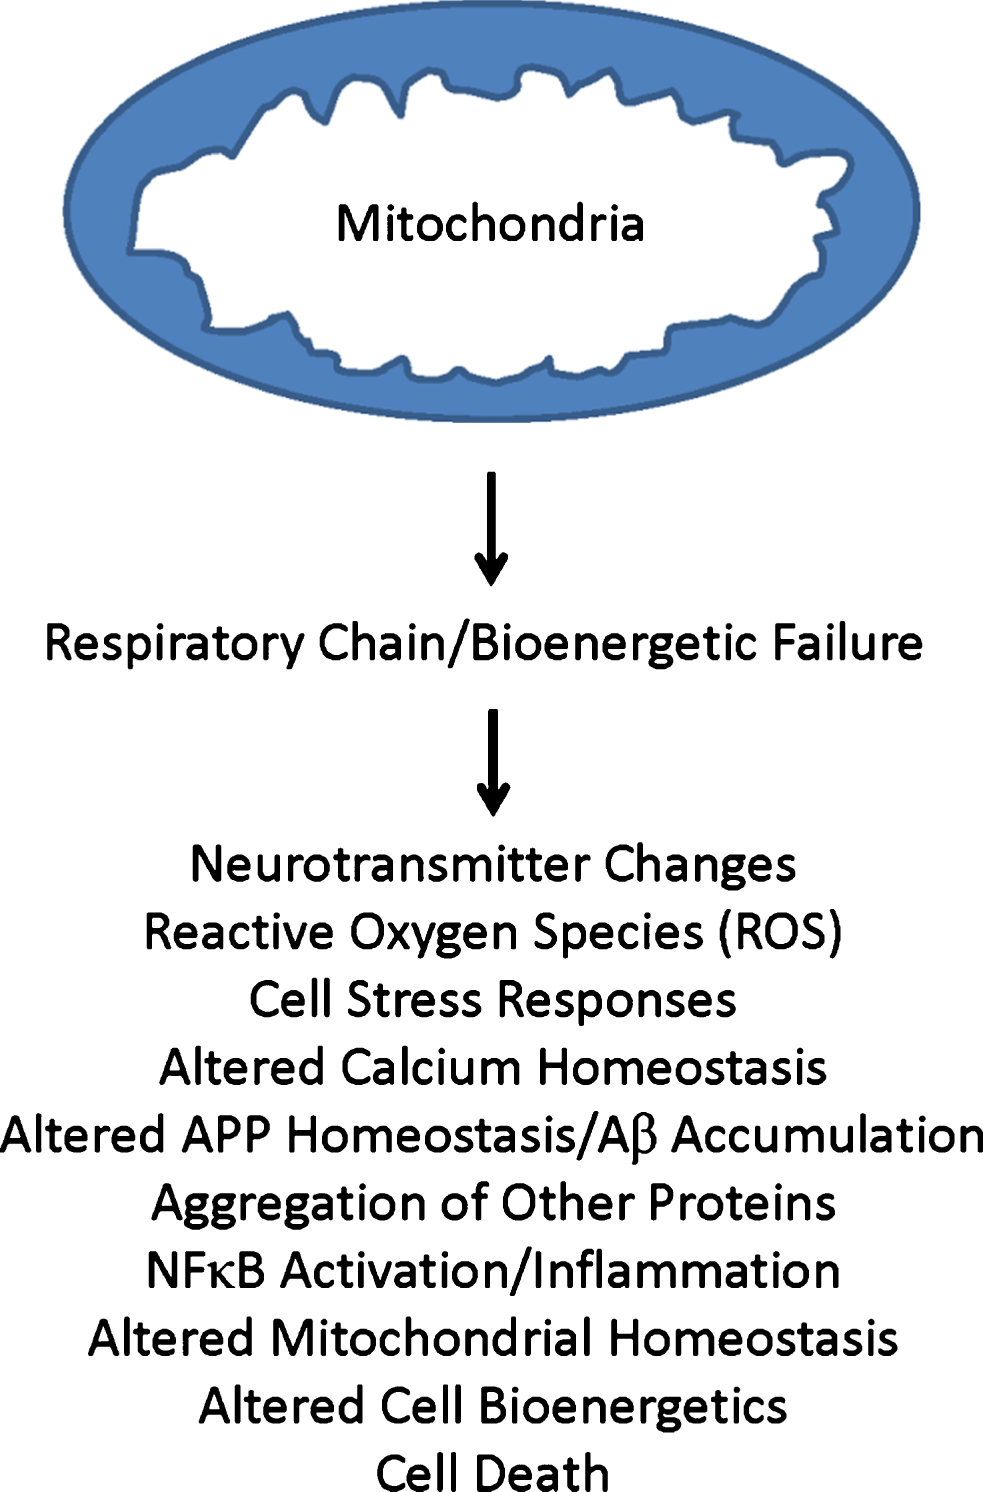 Primary mitochondrial cascade. A primary mitochondrial cascade is incompatible with the amyloid cascade hypothesis. Under this scenario, impaired mitochondrial function and associated bioenergetic changes alter Aβ homeostasis and lead to an accumulation of Aβ. Aβ may or may not in turn contribute to the development of other AD-associated functional changes and pathologies.